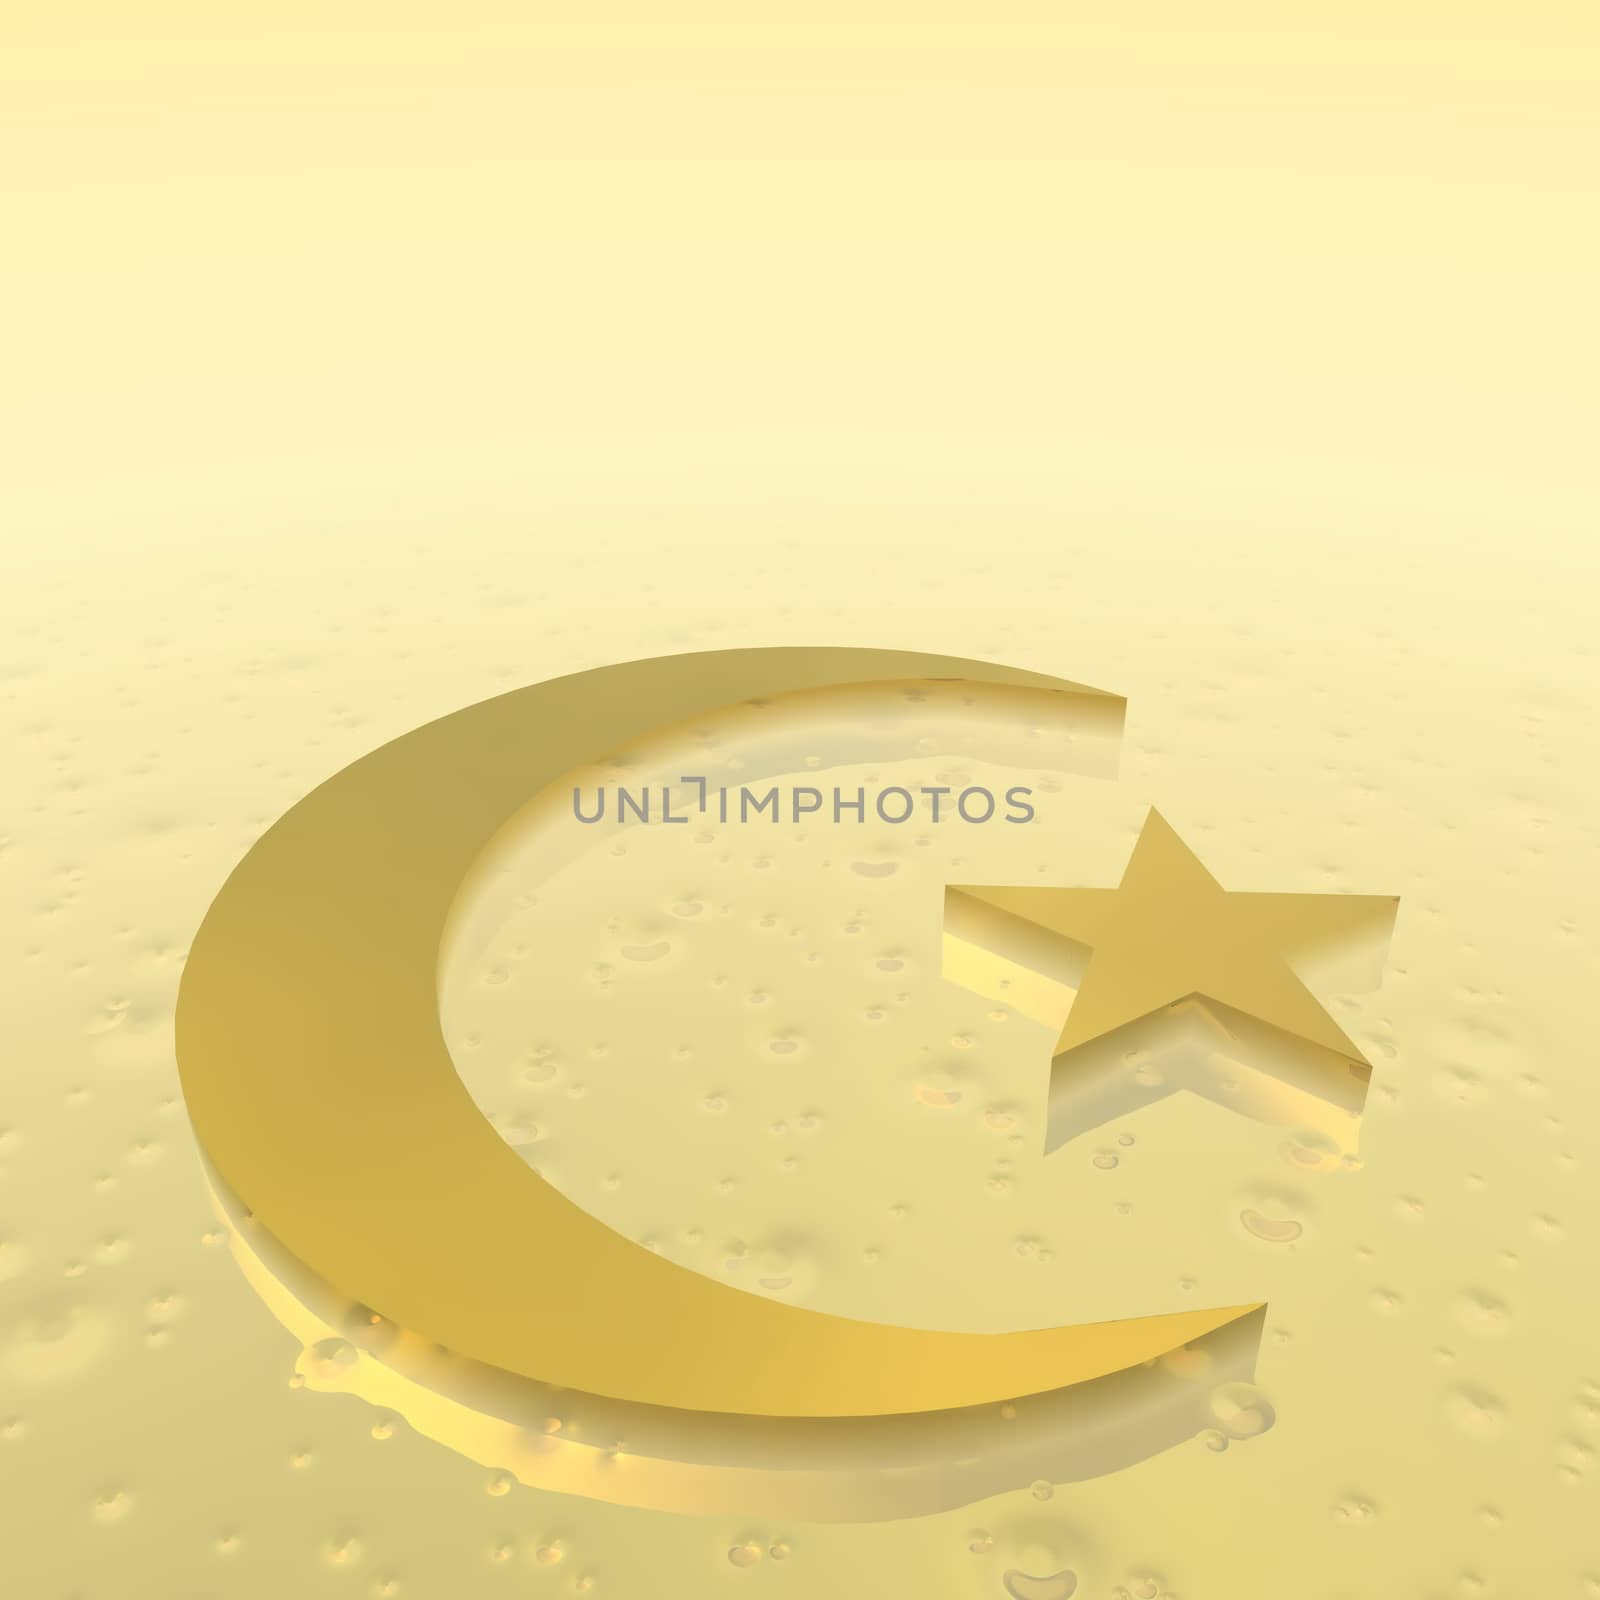 Crescent and star as symbol of Islam religion in golden ground